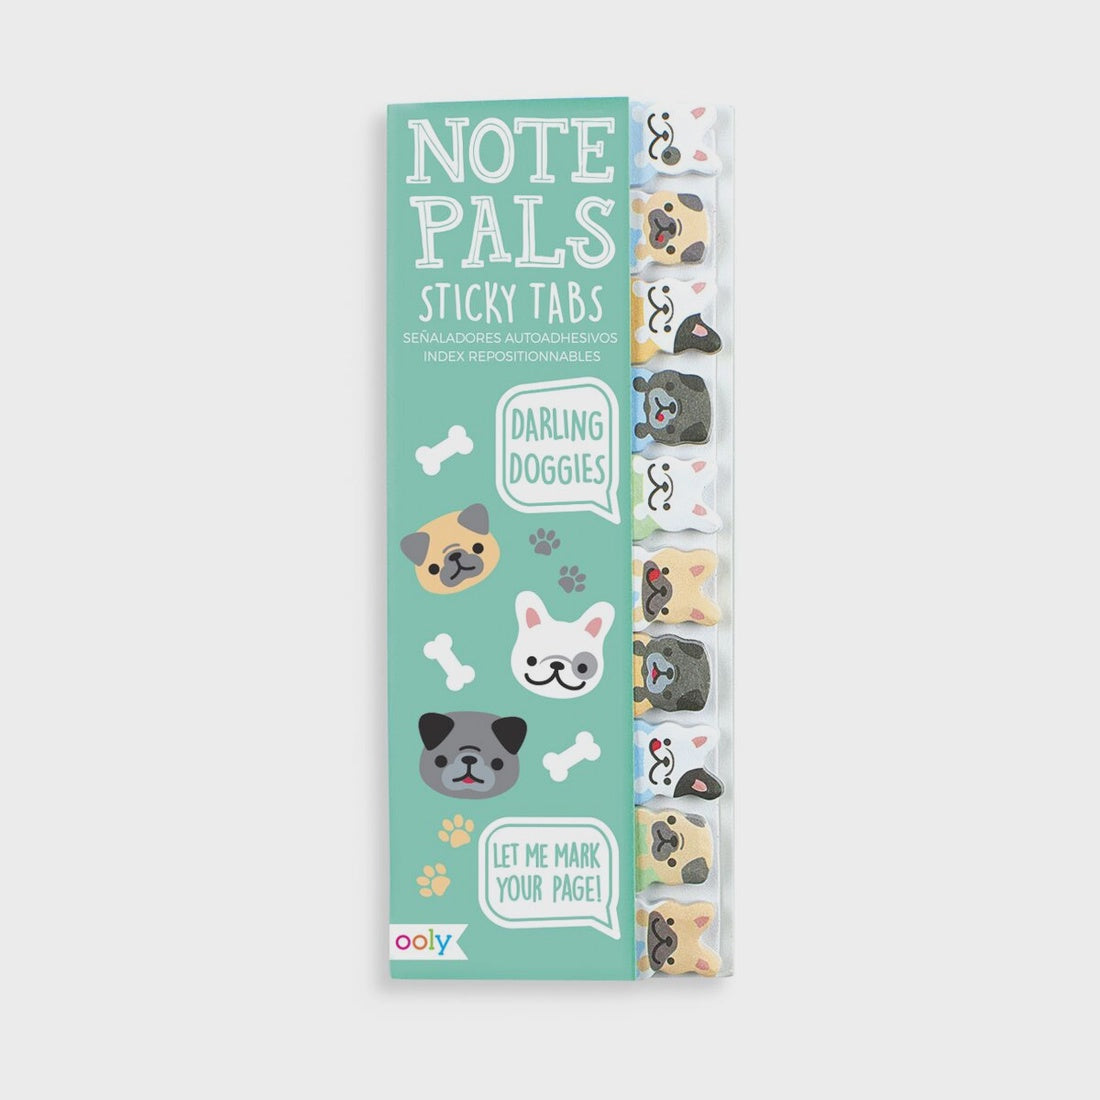 Note Pals Sticky Tabs- Darling Doggies